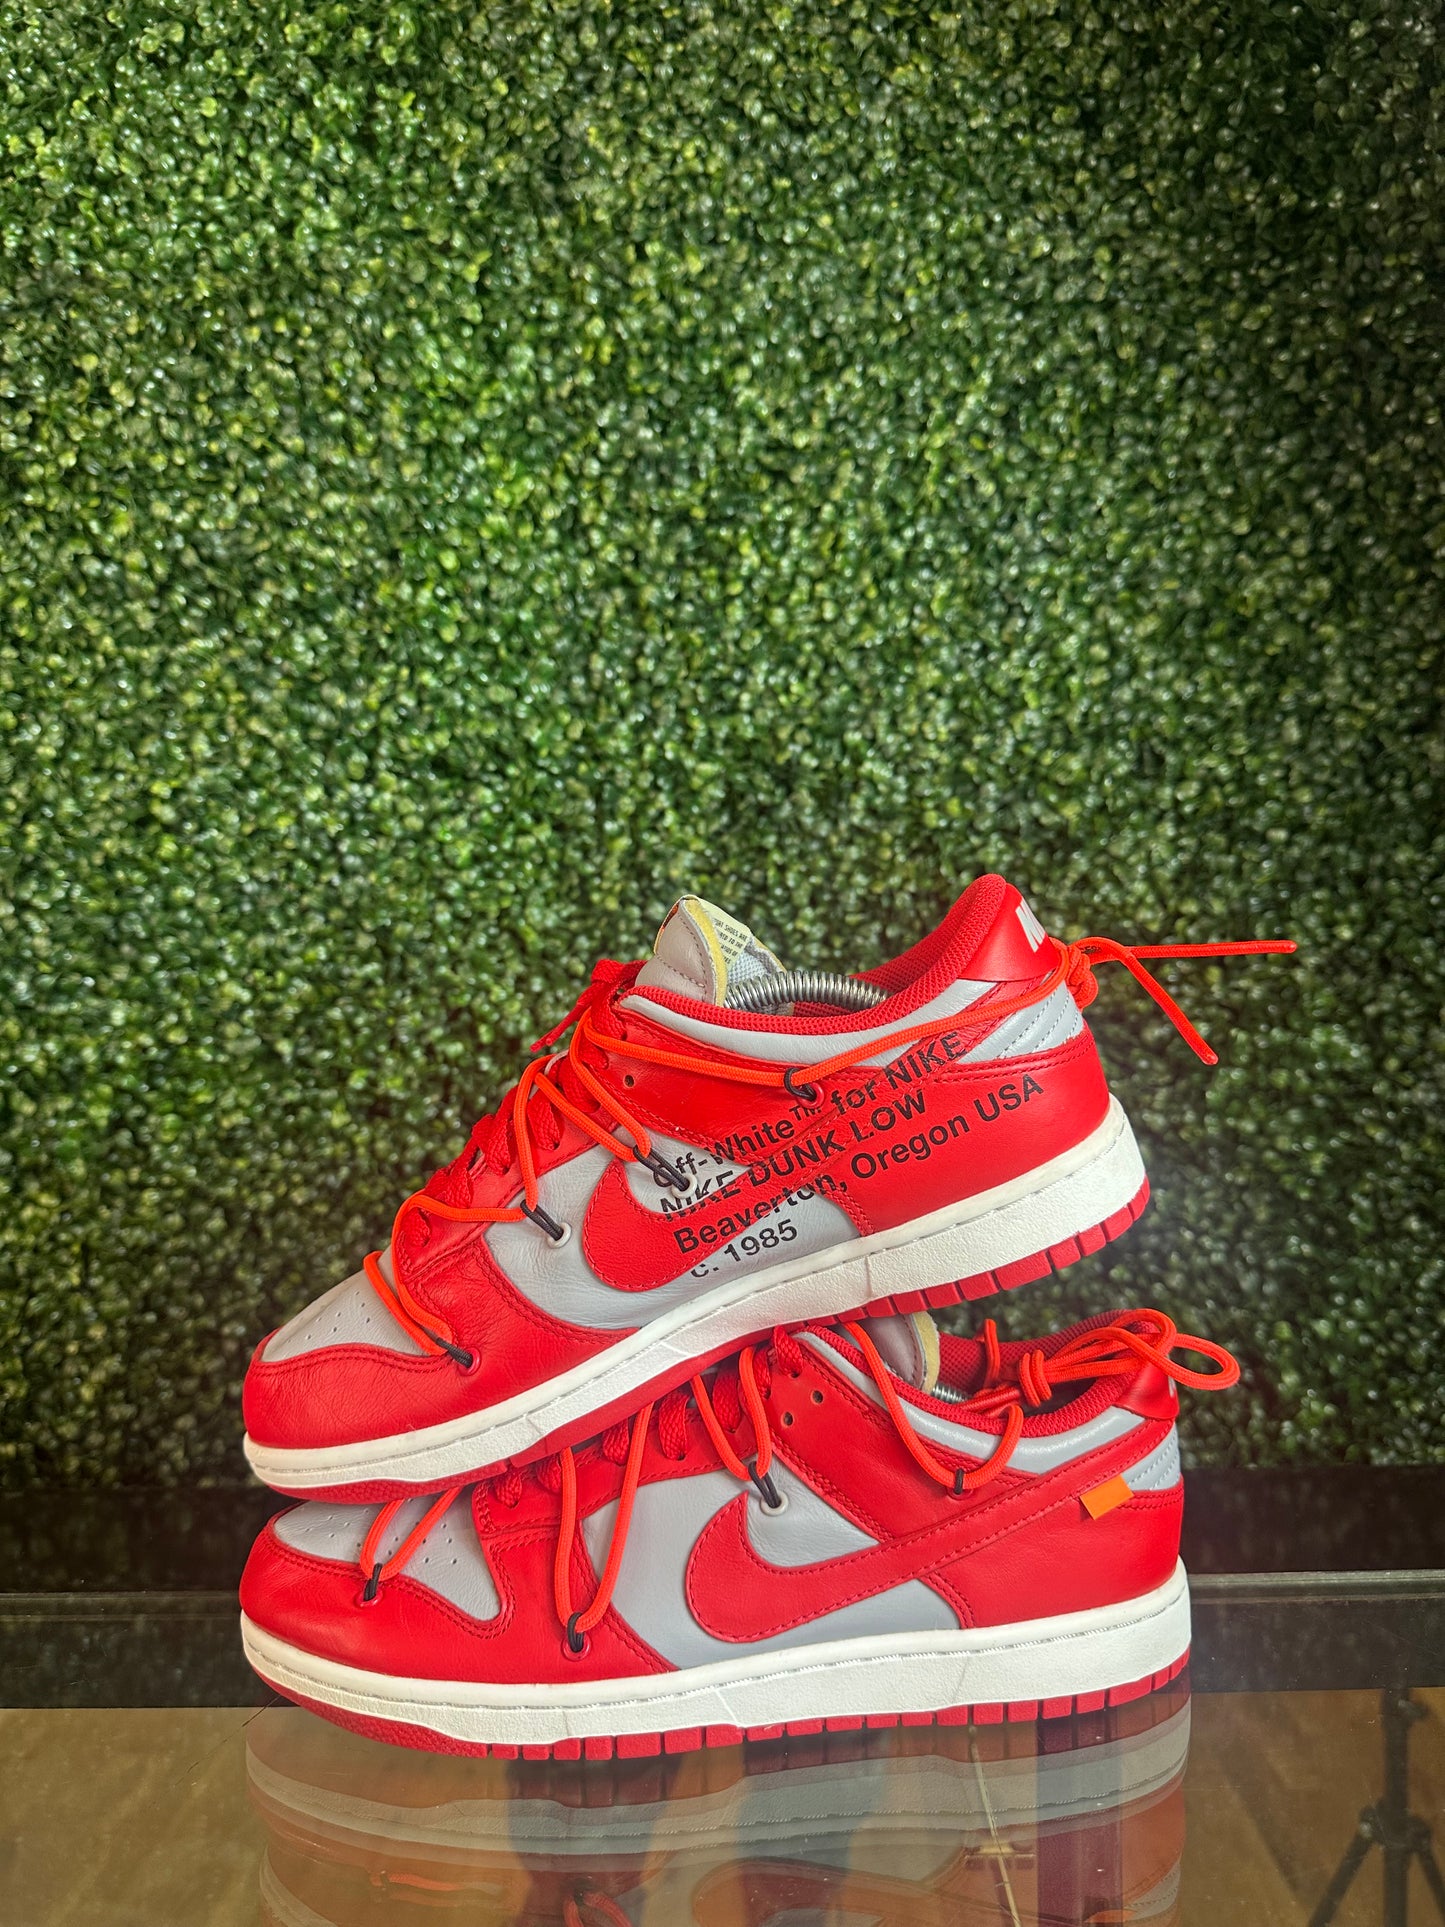 Off-White x Nike Dunk Low LTHR “UNLV” Size 9.5 CLEAN NB